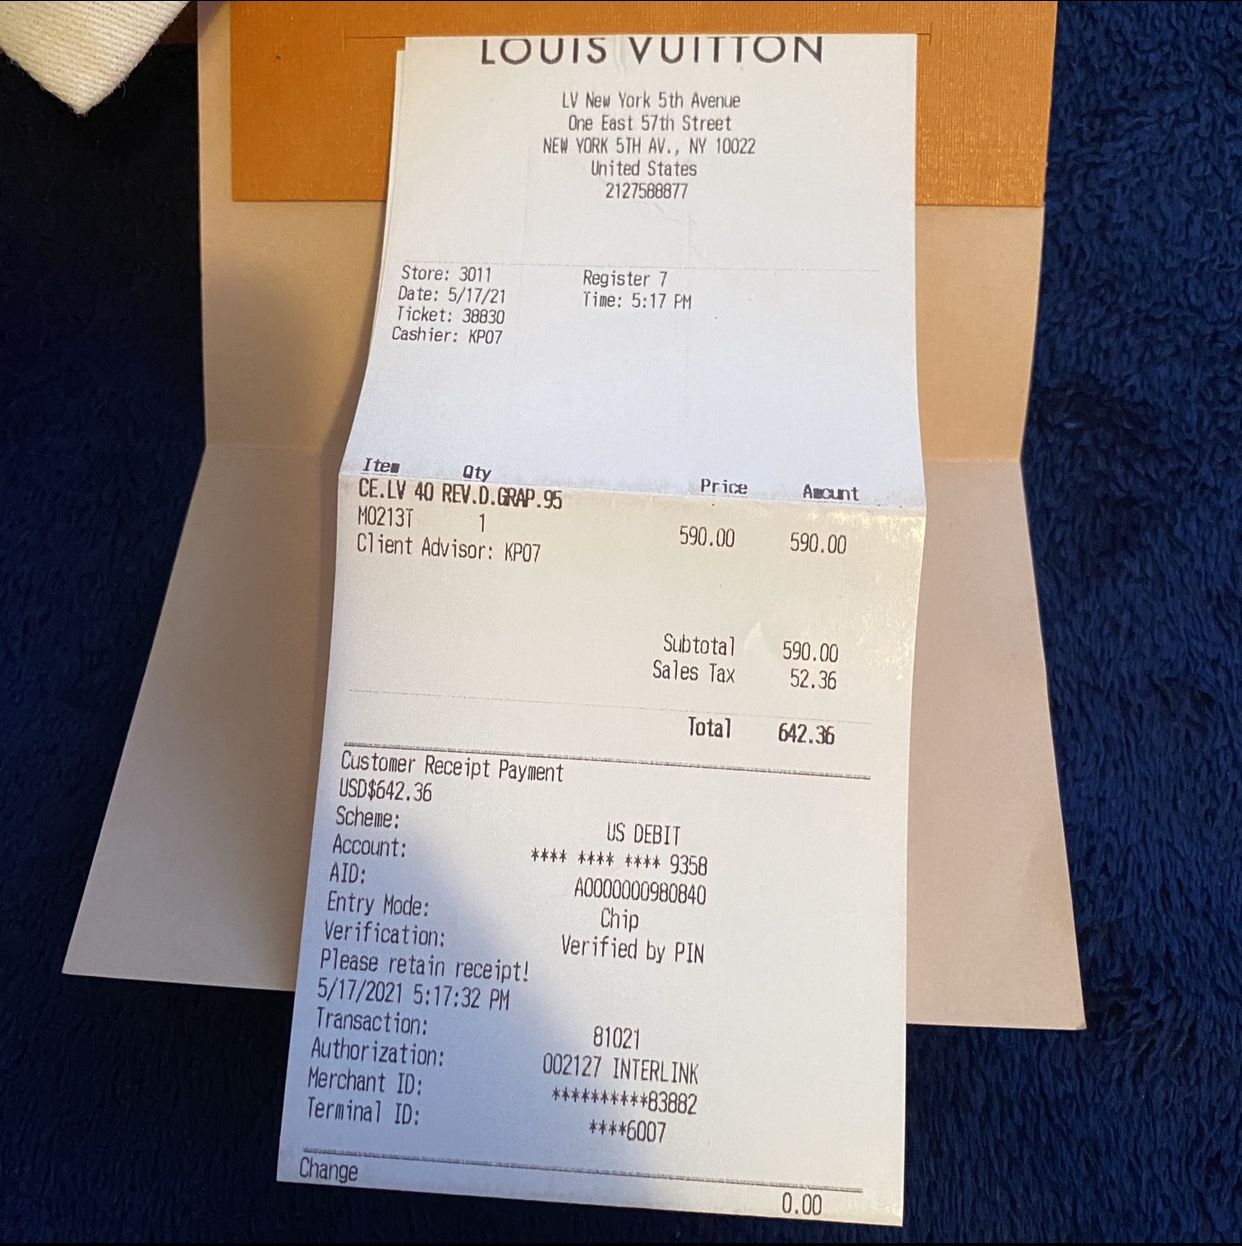 $300  LOUIS VUITTON BELT * COMES WITH RECEIPT for Sale in The